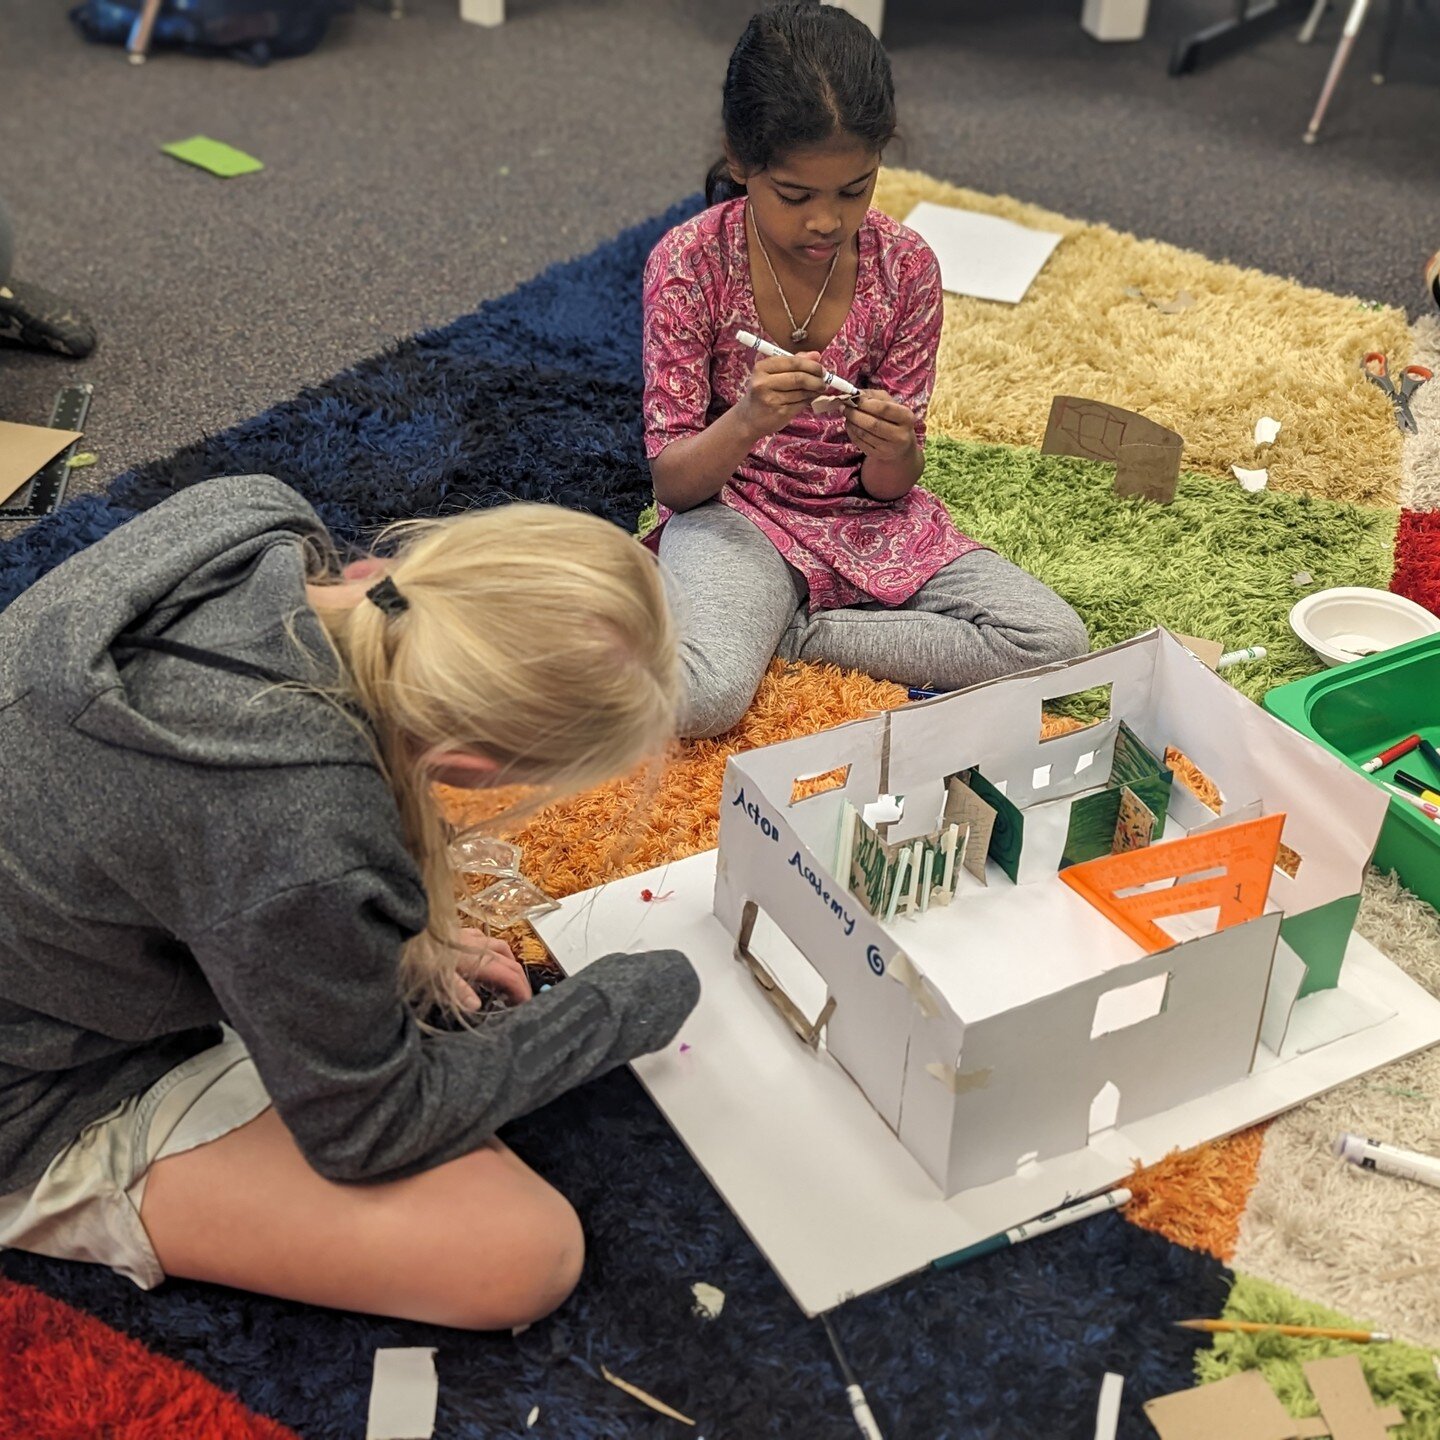 Our Elementary Studio architects are hard at work designing their Dream Acton. They have studying floor plans, elevation designs, and are now building their dream school models. #Creativity #LearningByDoing